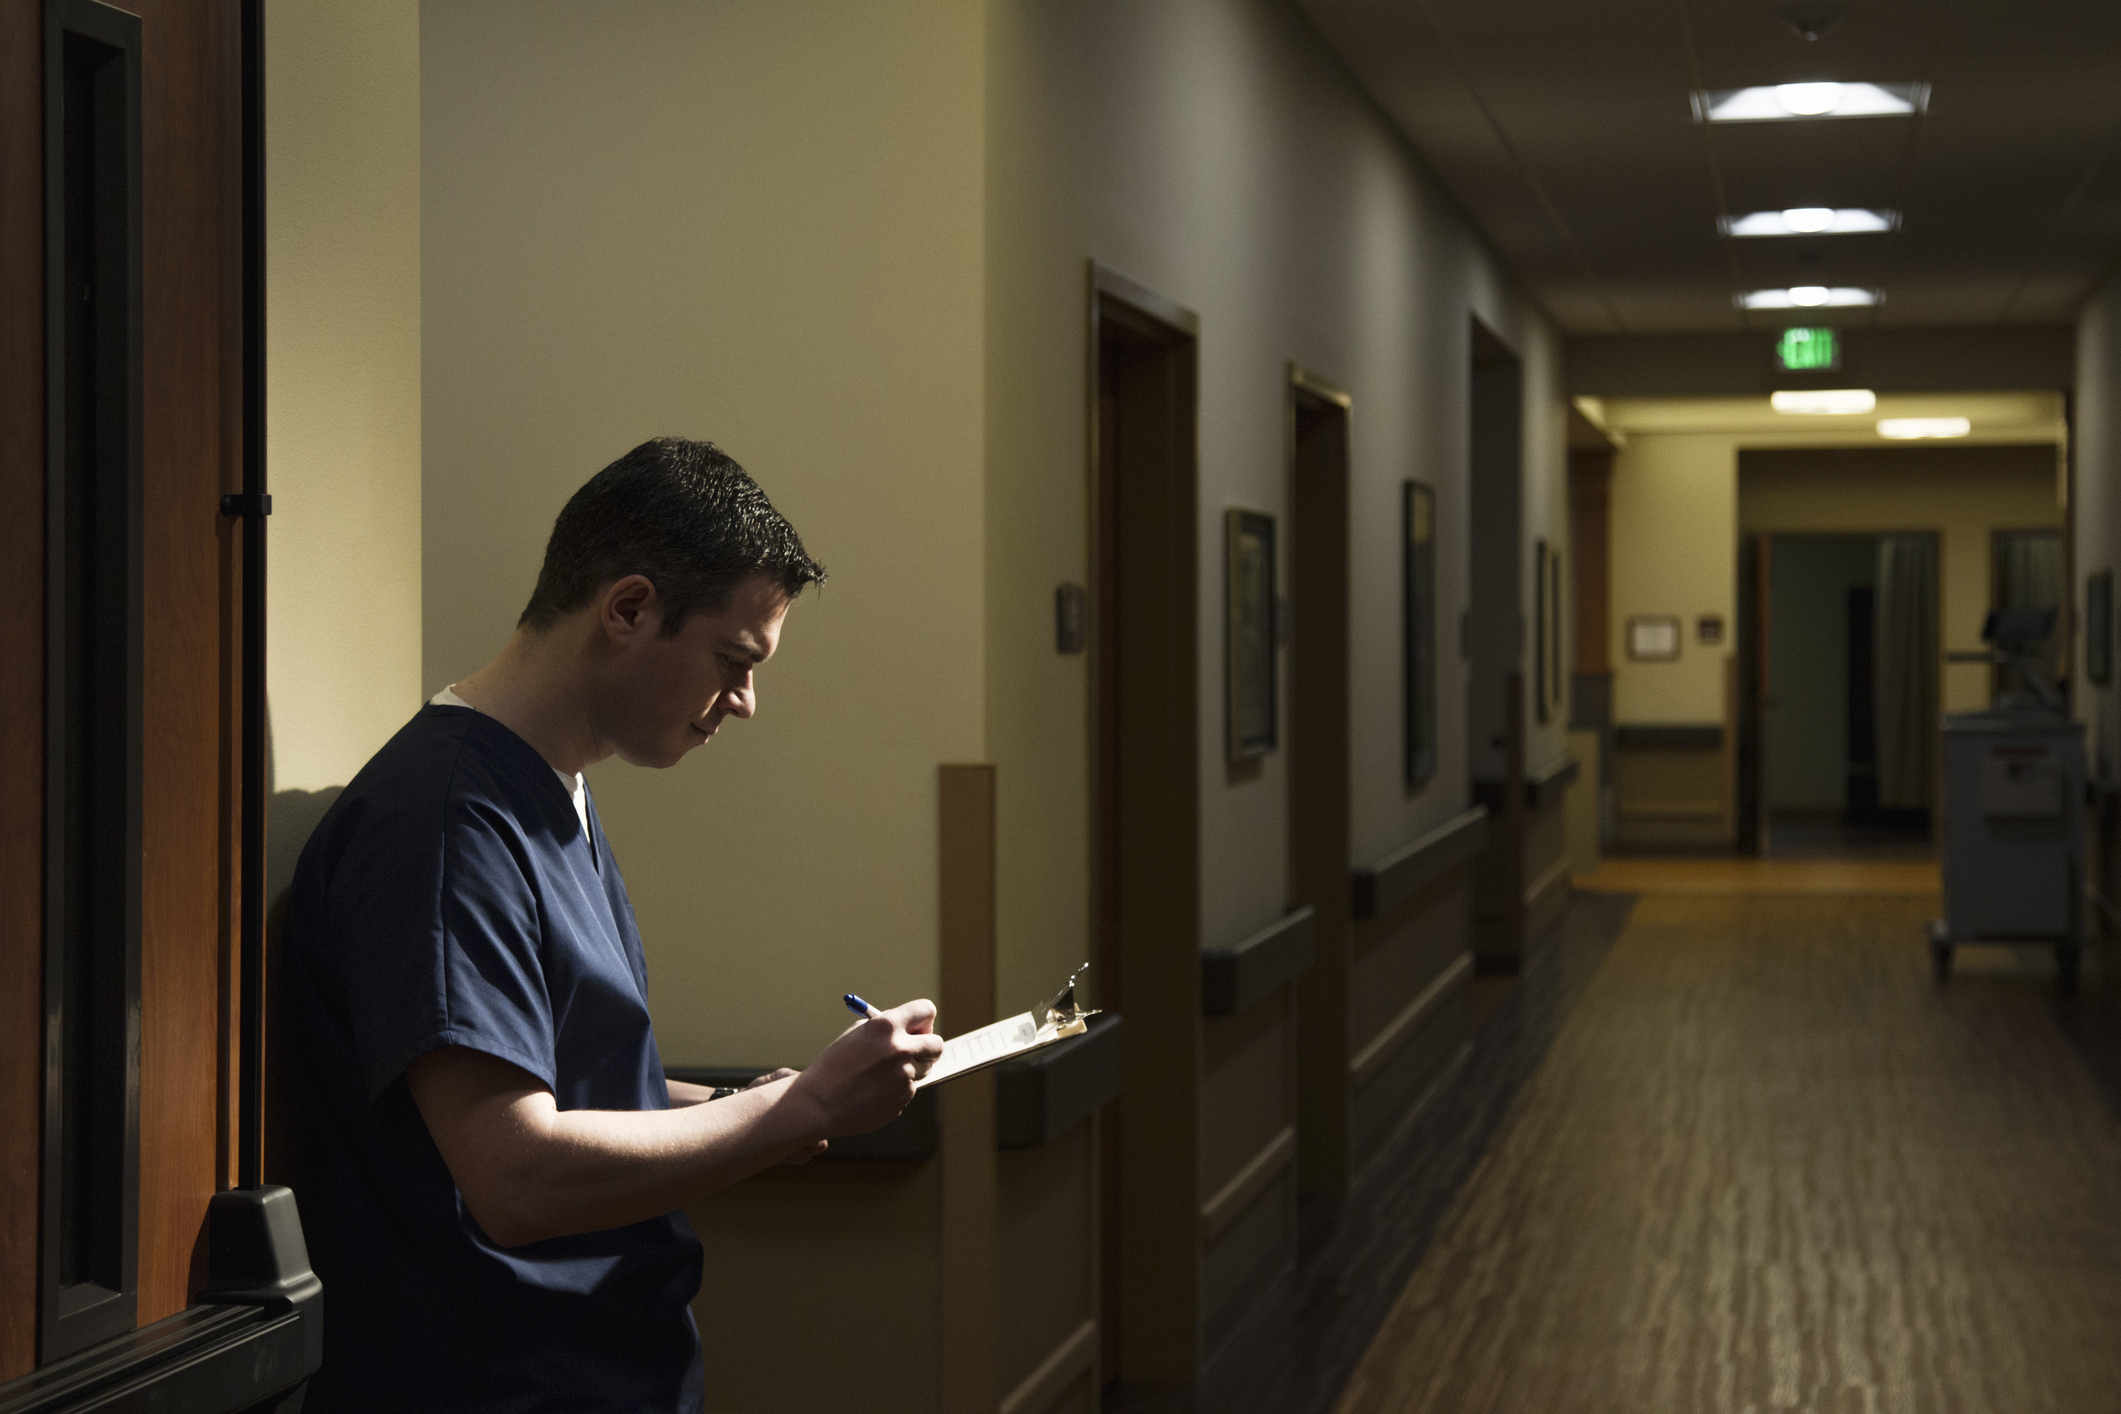 Healthcare worker in scrubs reviewing notes in a hospital corridor